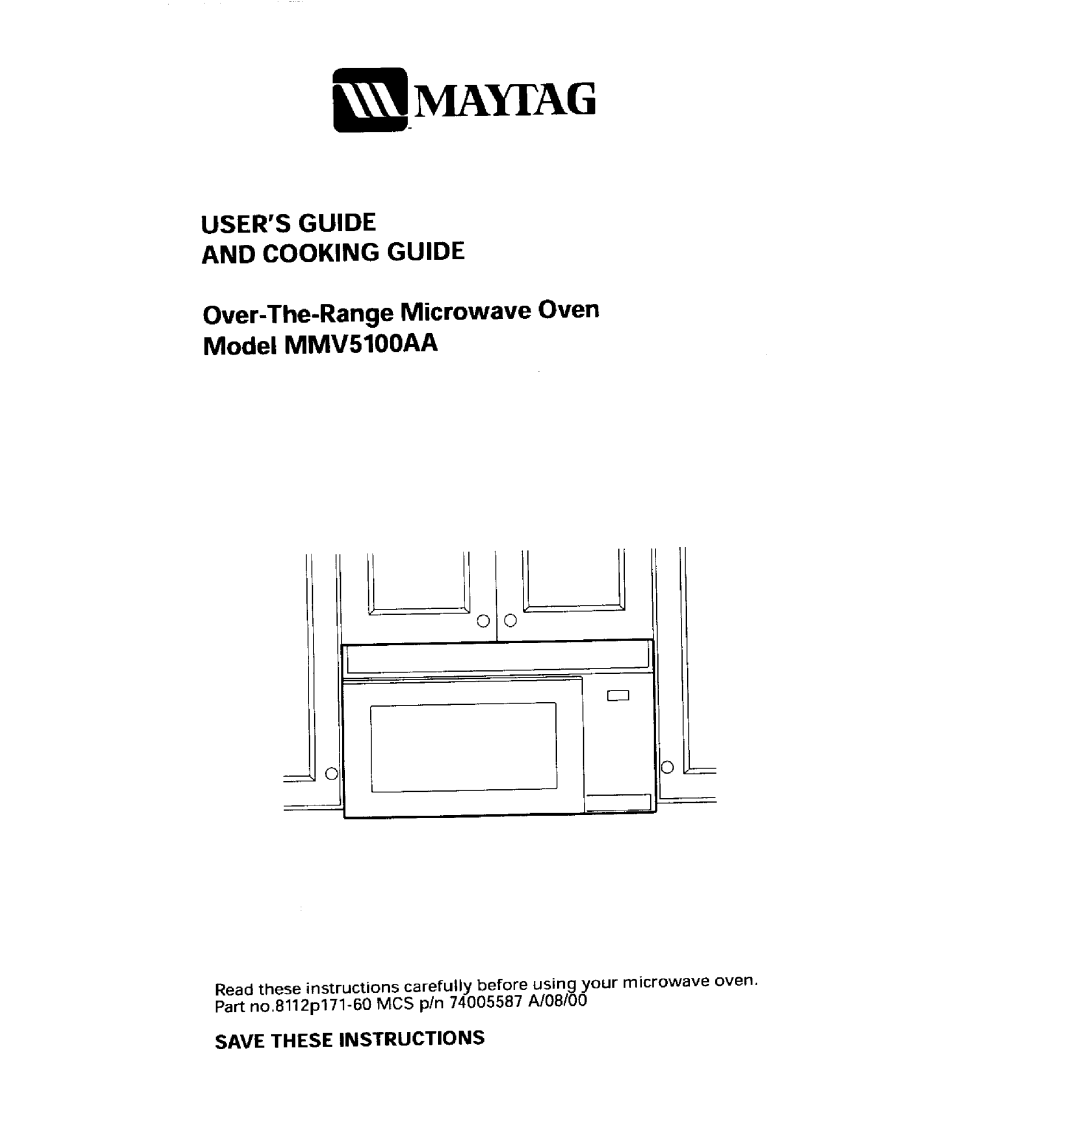 Maytag MMV5100AA manual Save These Instructions, USER’S GUIDE AND COOKING GUIDE Over-The-Range Microwave Oven 